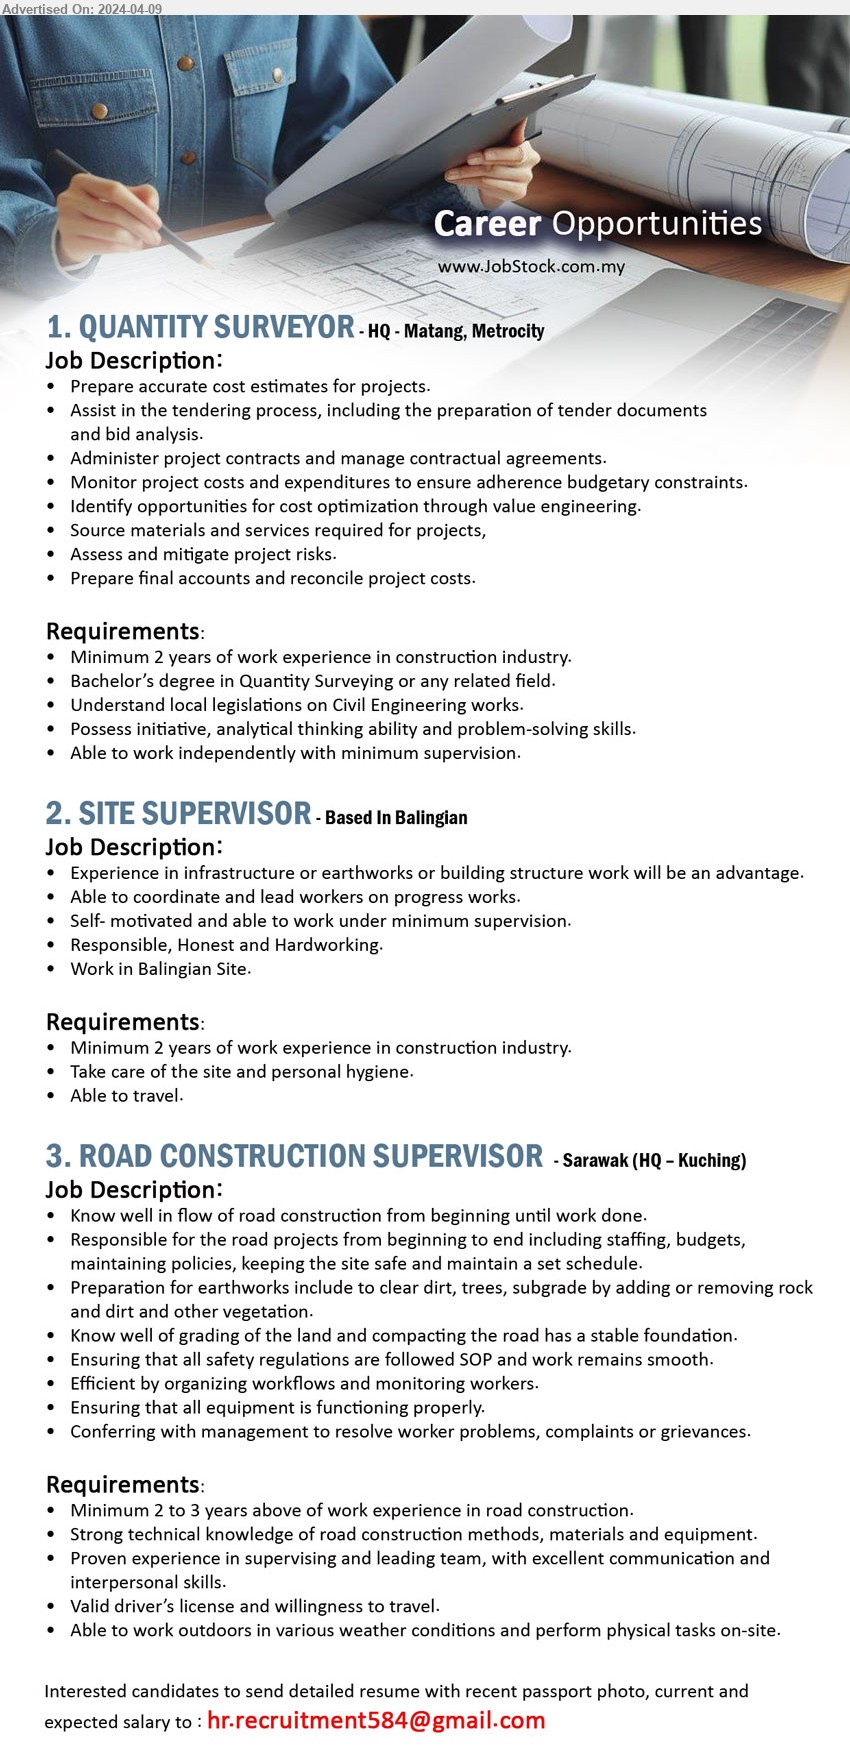 ADVERTISER - 1. QUANTITY SURVEYOR (Matang, Metrocity), Bachelor’s degree in Quantity Surveying, 2 yrs. exp.,...
2. SITE SUPERVISOR (Balingian), Minimum 2 years of work experience in construction industry.,...
3. ROAD CONSTRUCTION SUPERVISOR (Kuching), Minimum 2 to 3 years above of work experience in road construction.,...
Email resume to ...